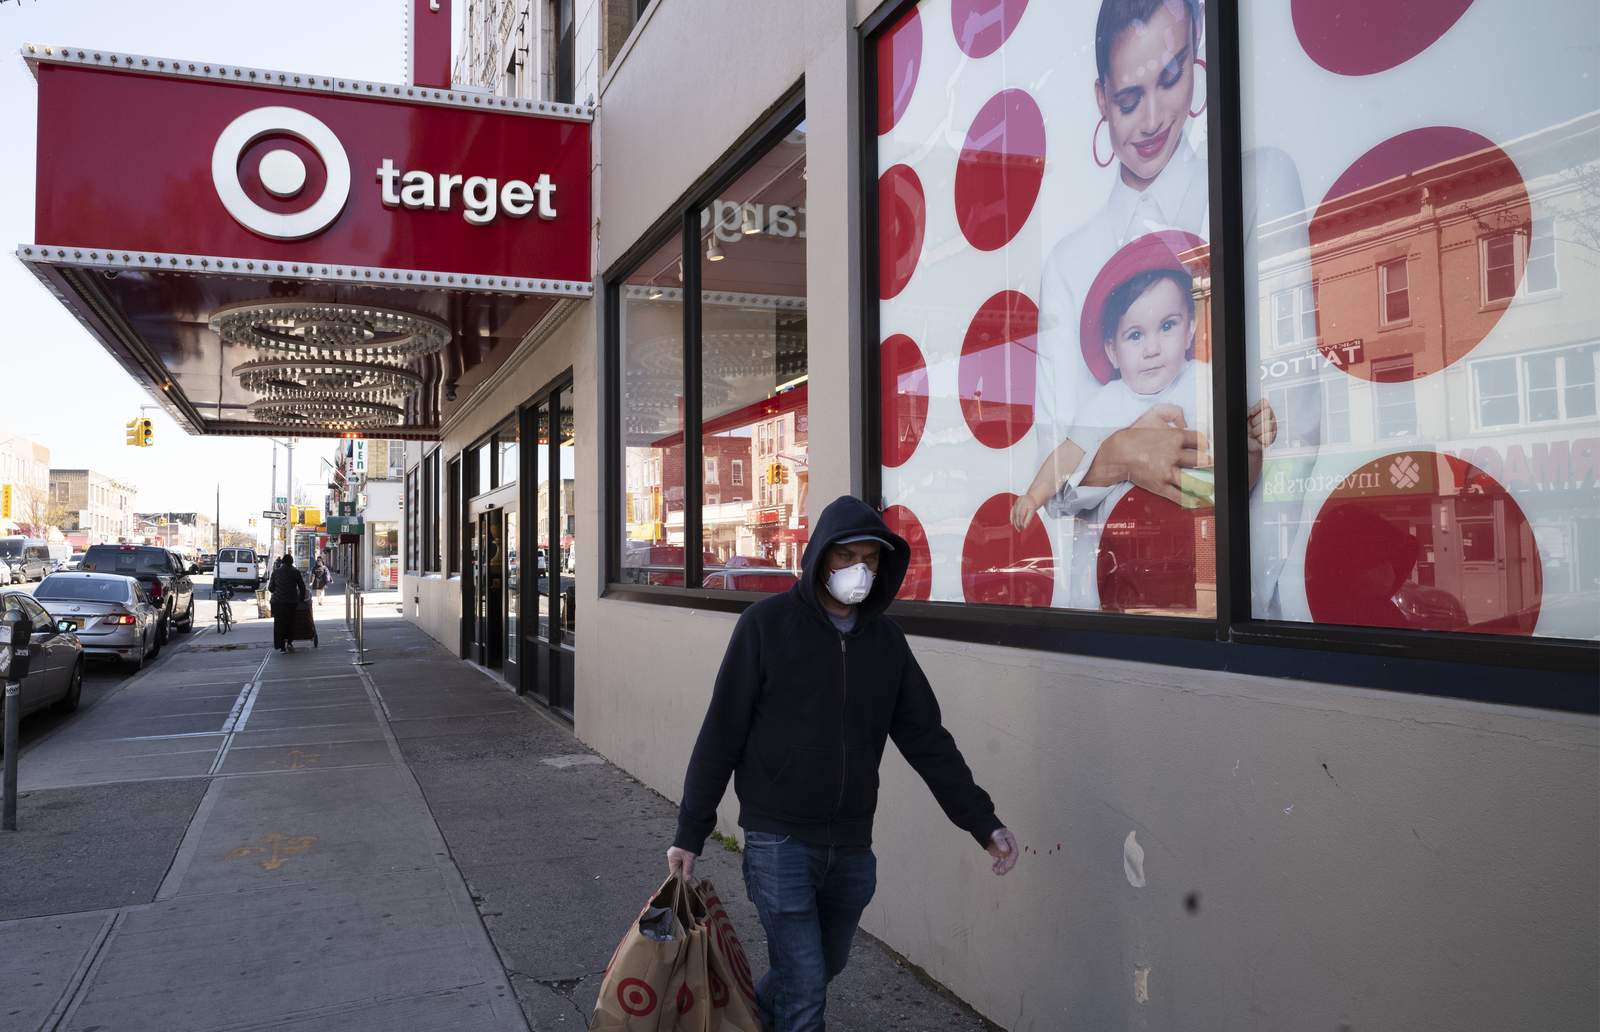 Big box rules: Target’s online push readied it for pandemic